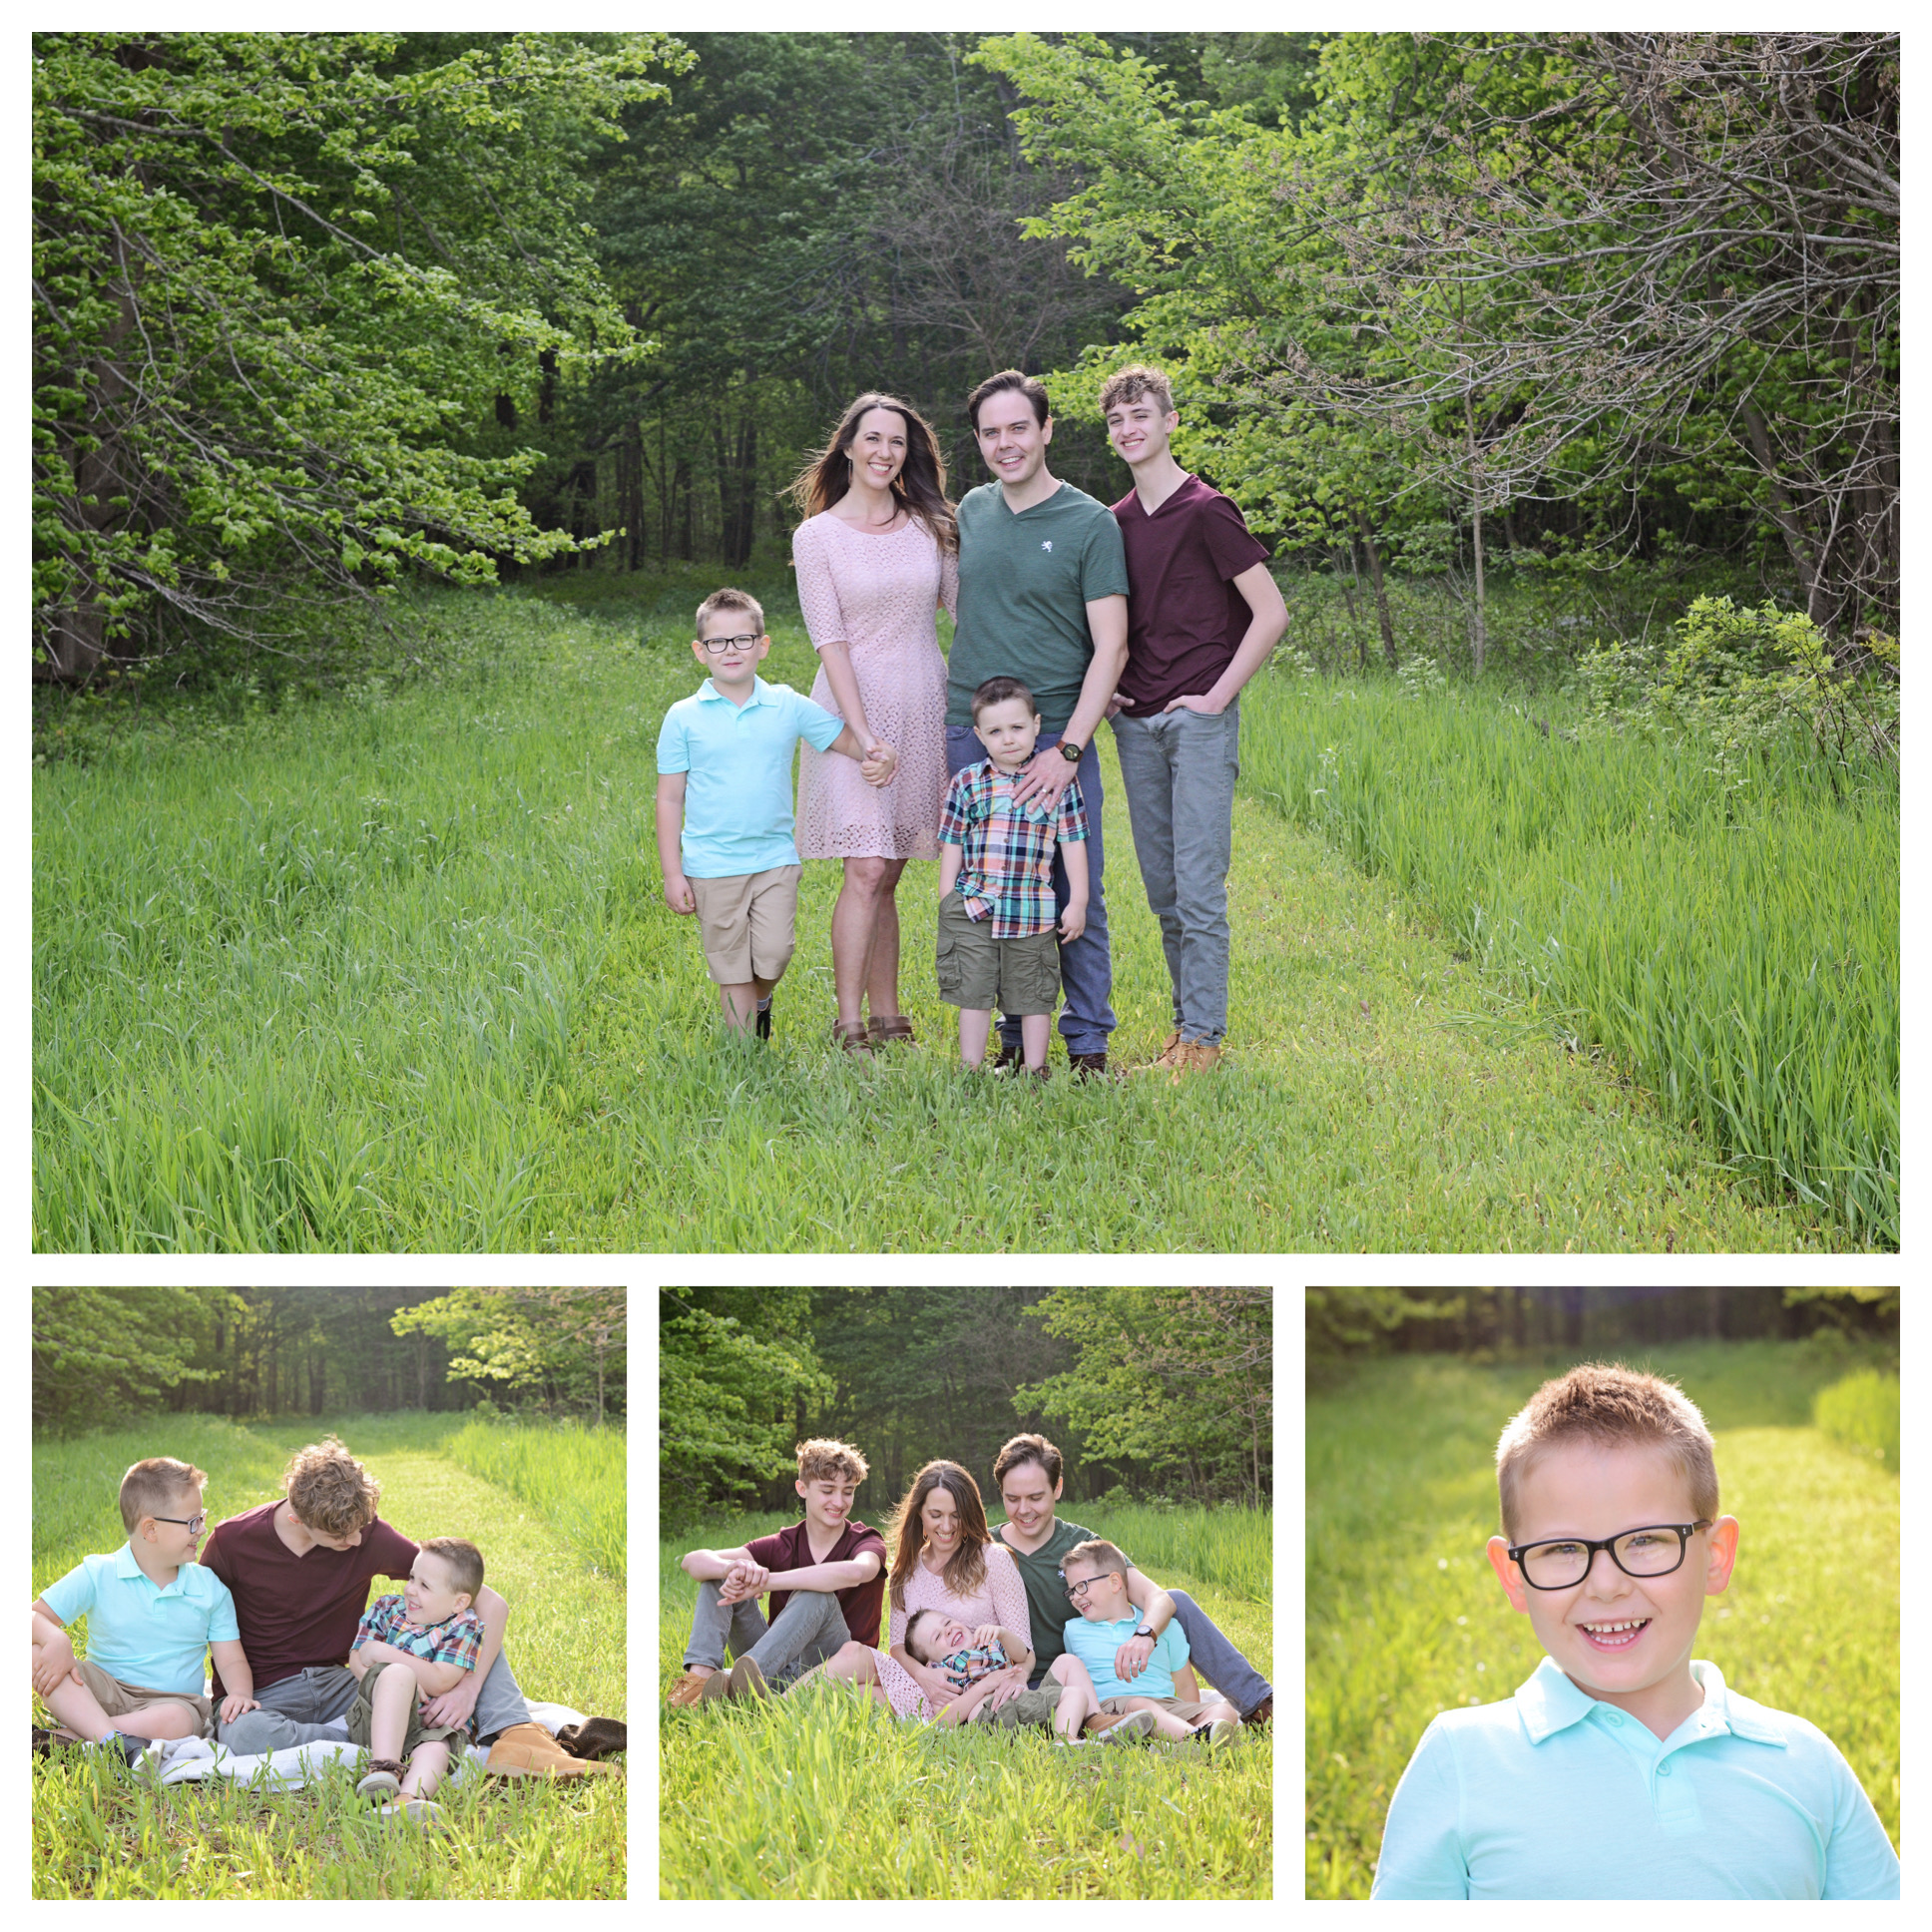 Spring Family Portraits, Family of 5 portraits, Family portraits with boys